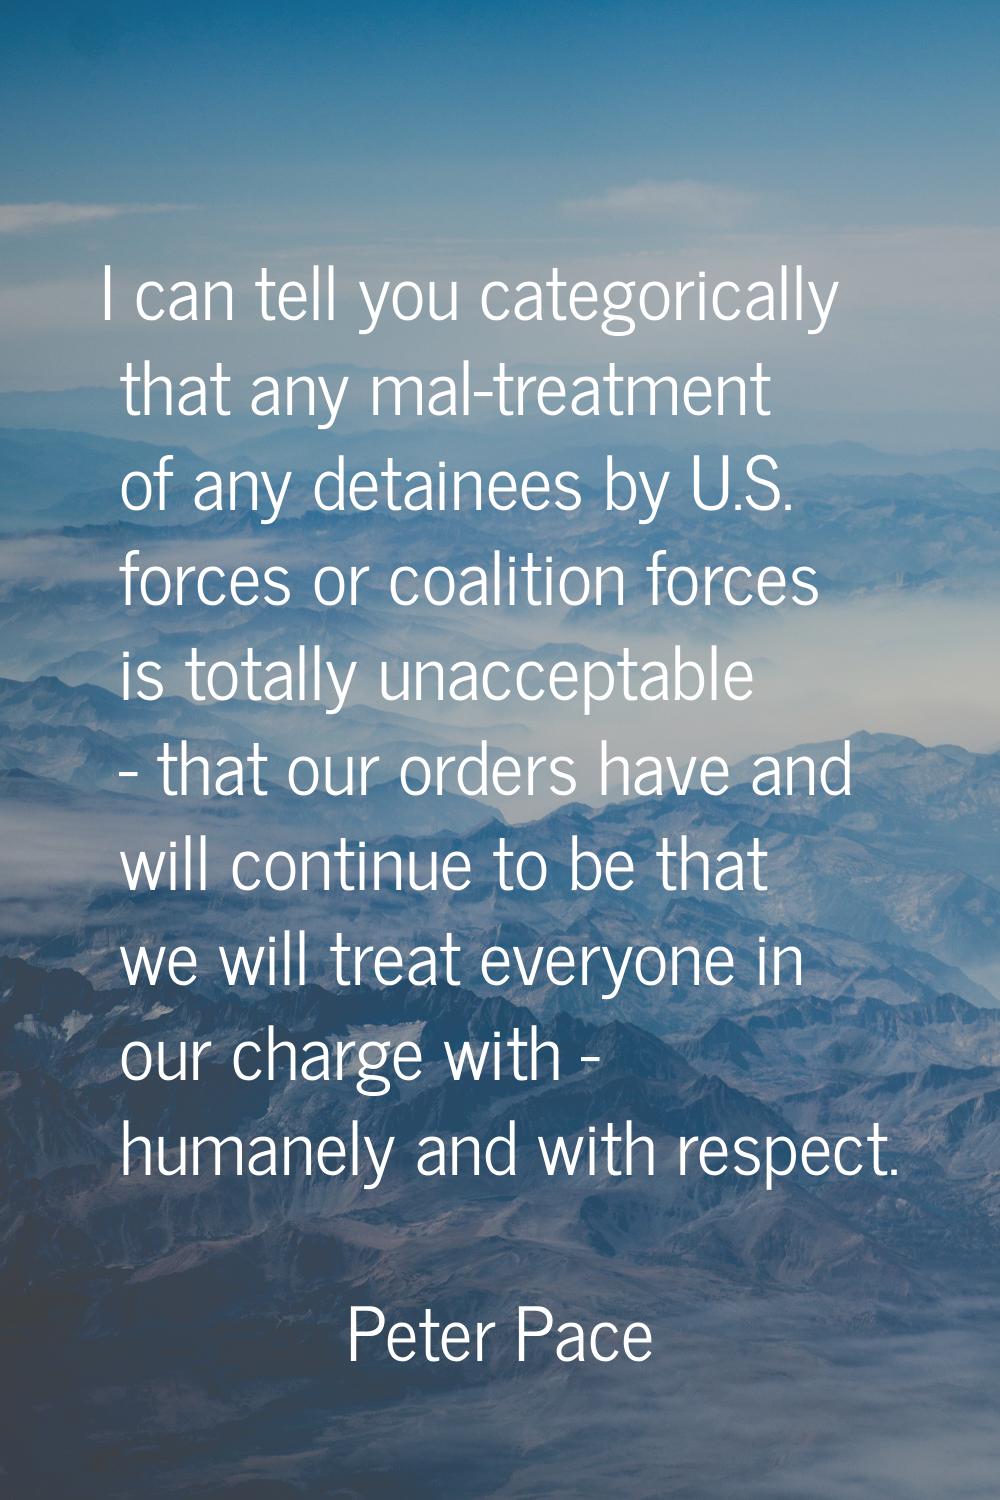 I can tell you categorically that any mal-treatment of any detainees by U.S. forces or coalition fo